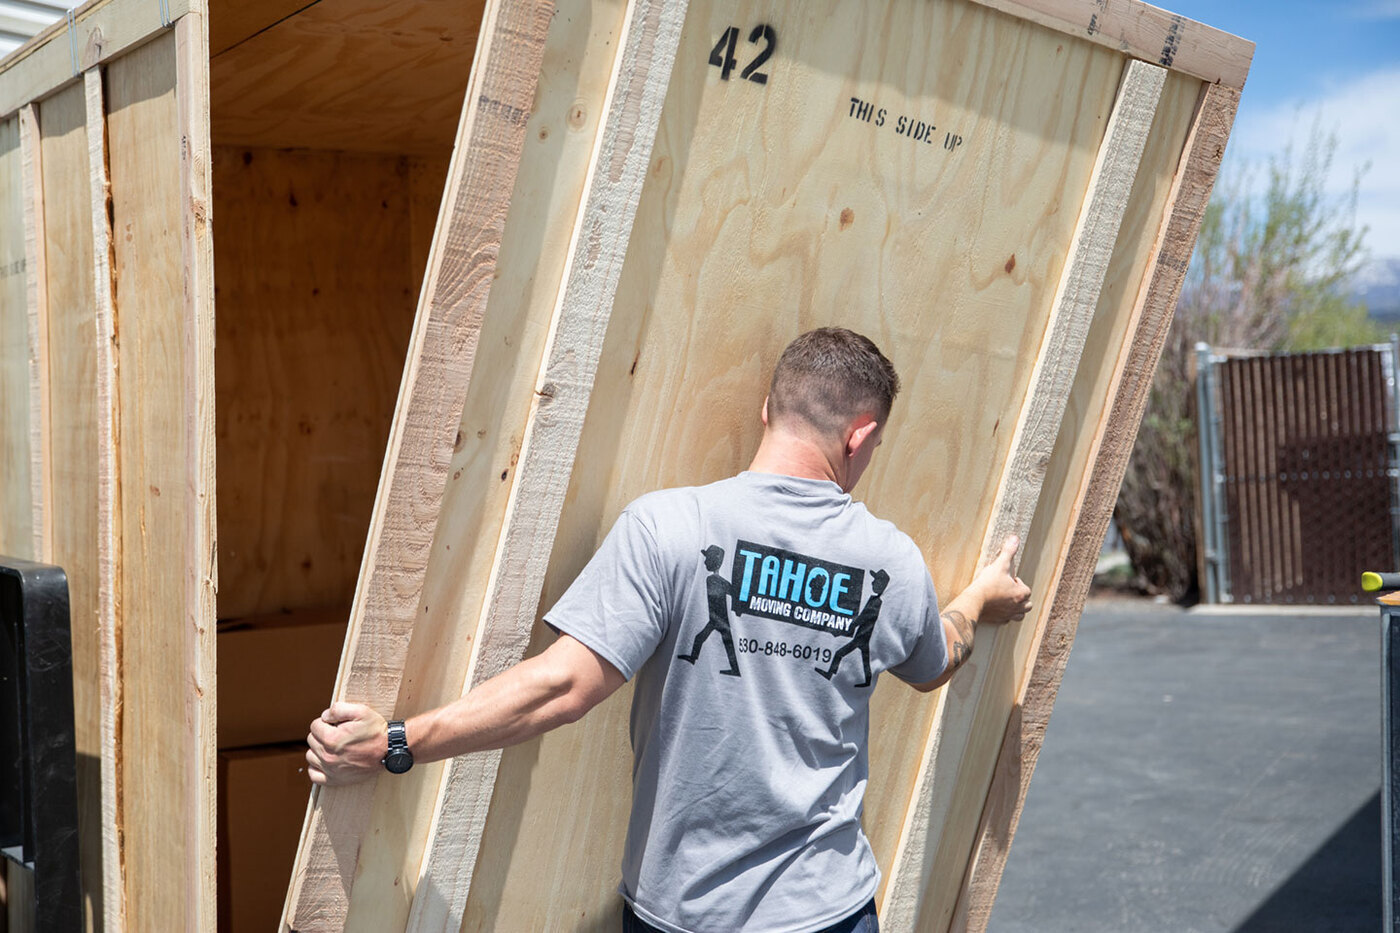 Tahoe Moving Company, the leading Moving Company in Truckee, is offering free moving estimates to interested clients